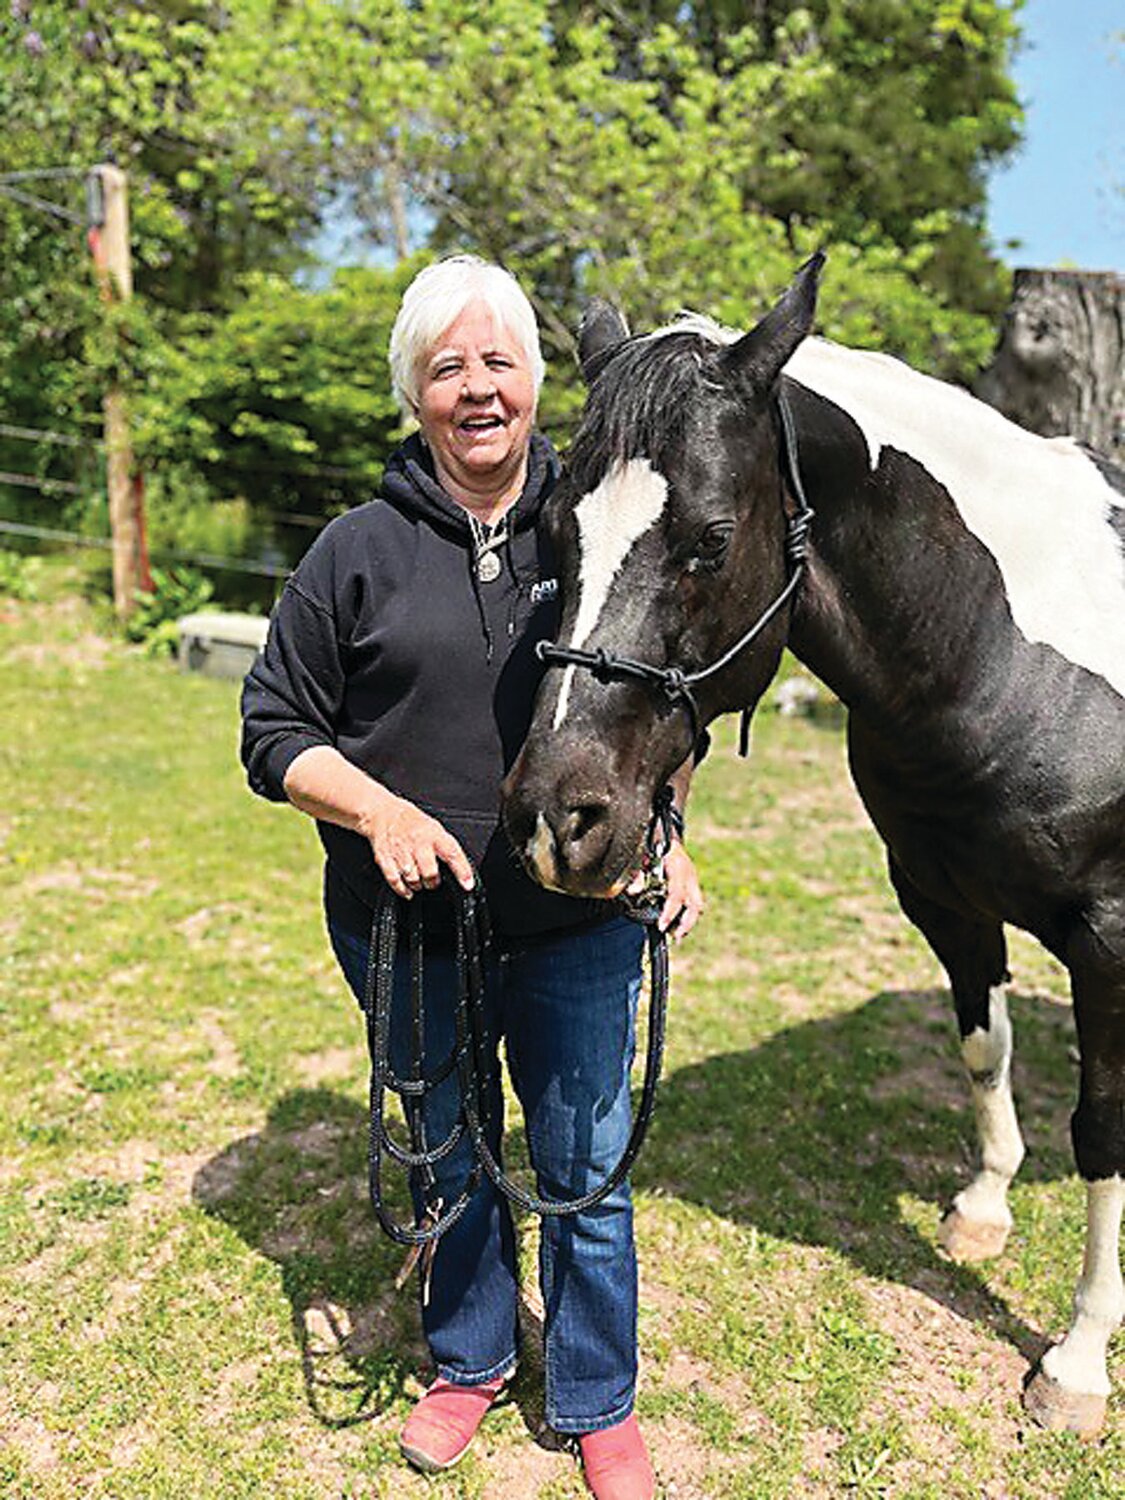 Linda Jenny, of Kintnersville, survived cancer and the death of her 30-year-old son, thanks, in part, to her horse, Roxy.